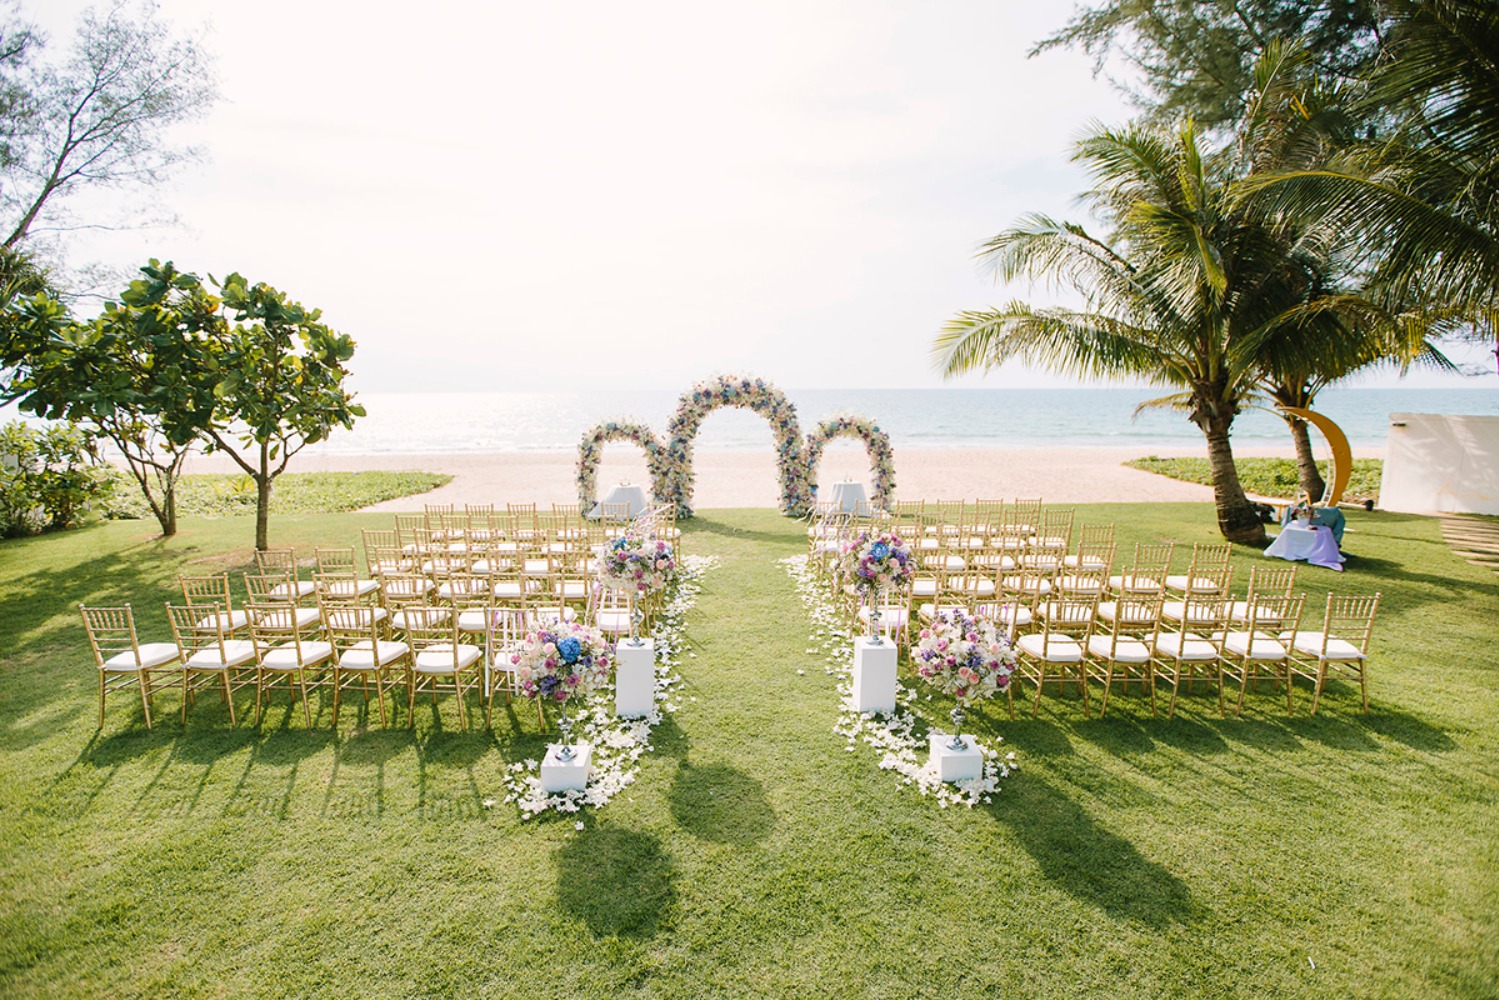 Beautiful double wedding by the beach in Phuket